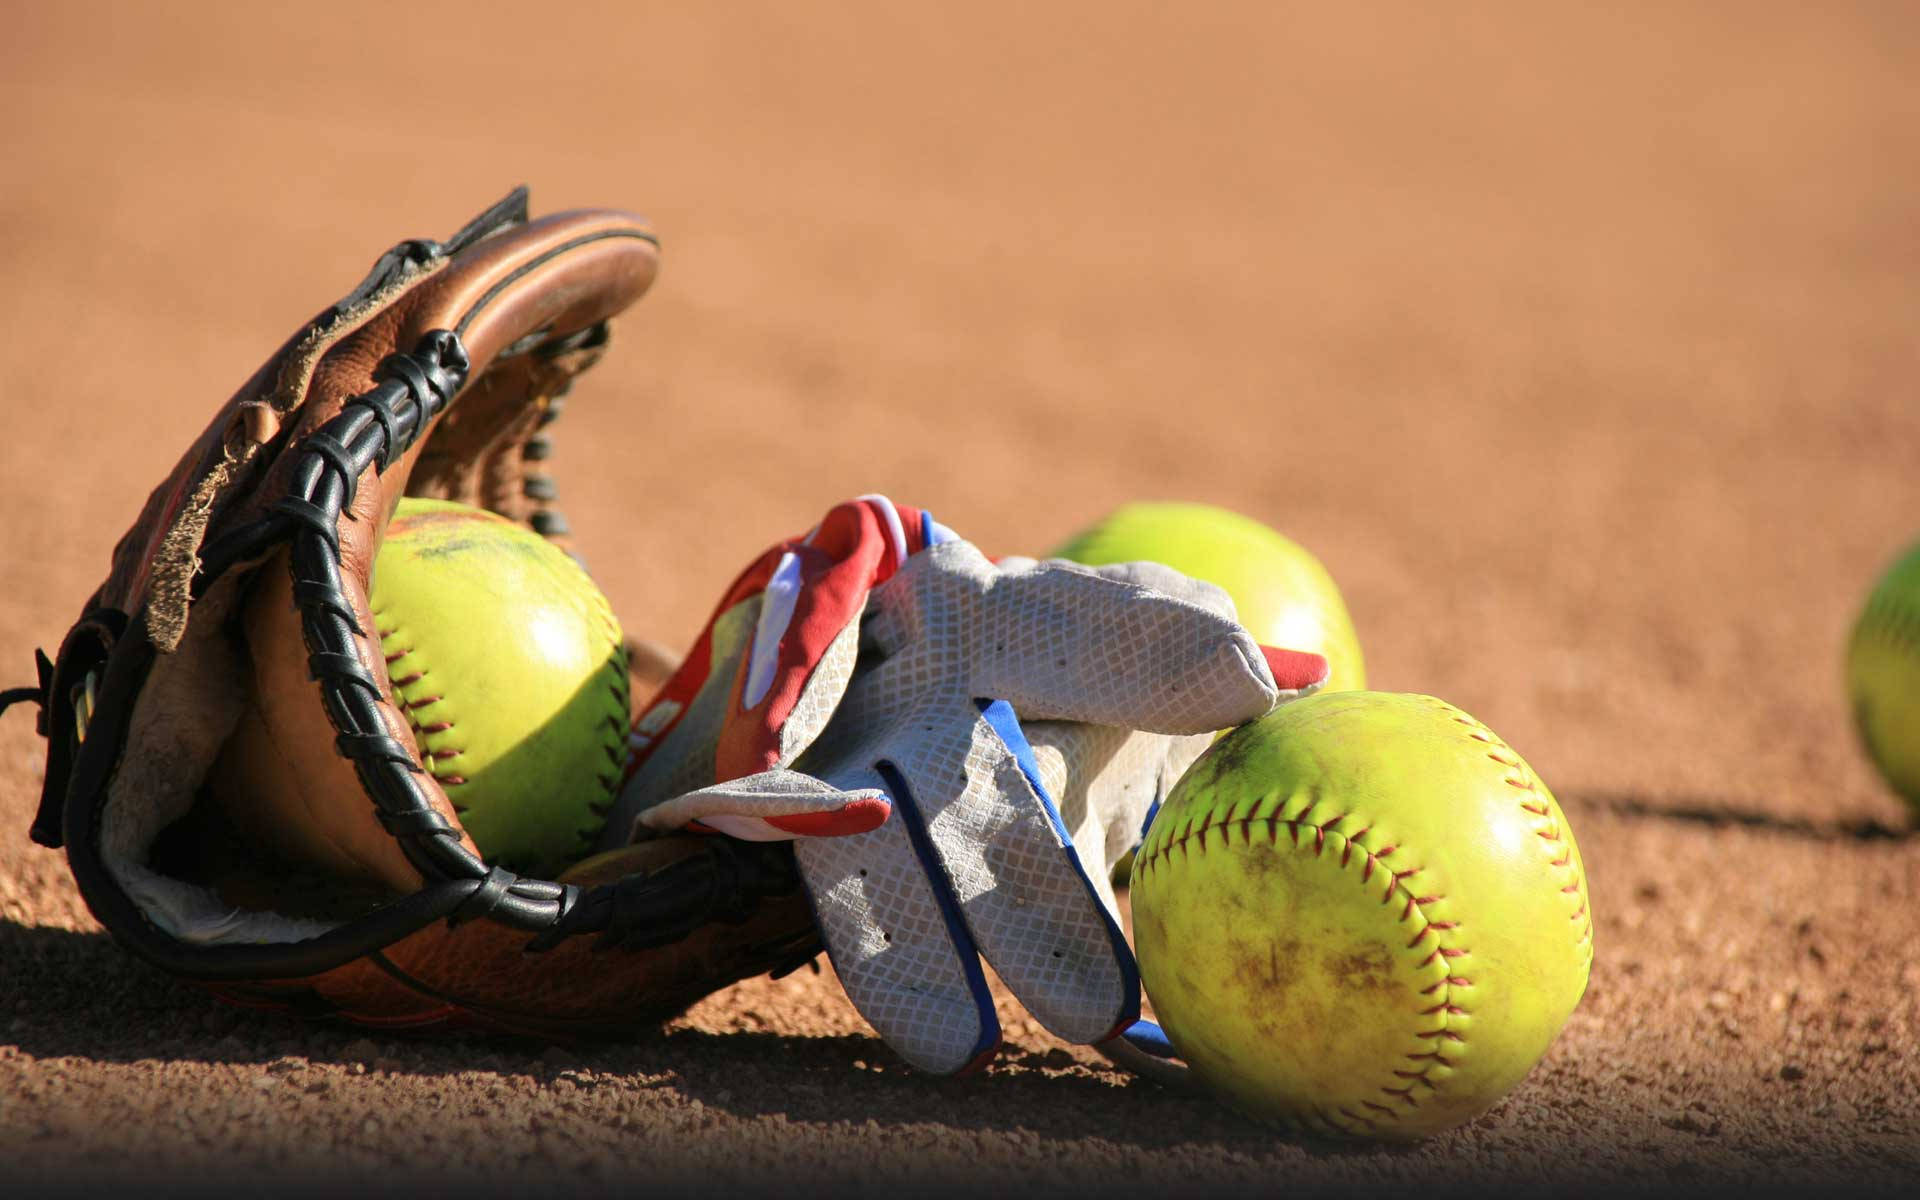 Cute Softball With Gloves Wallpaper